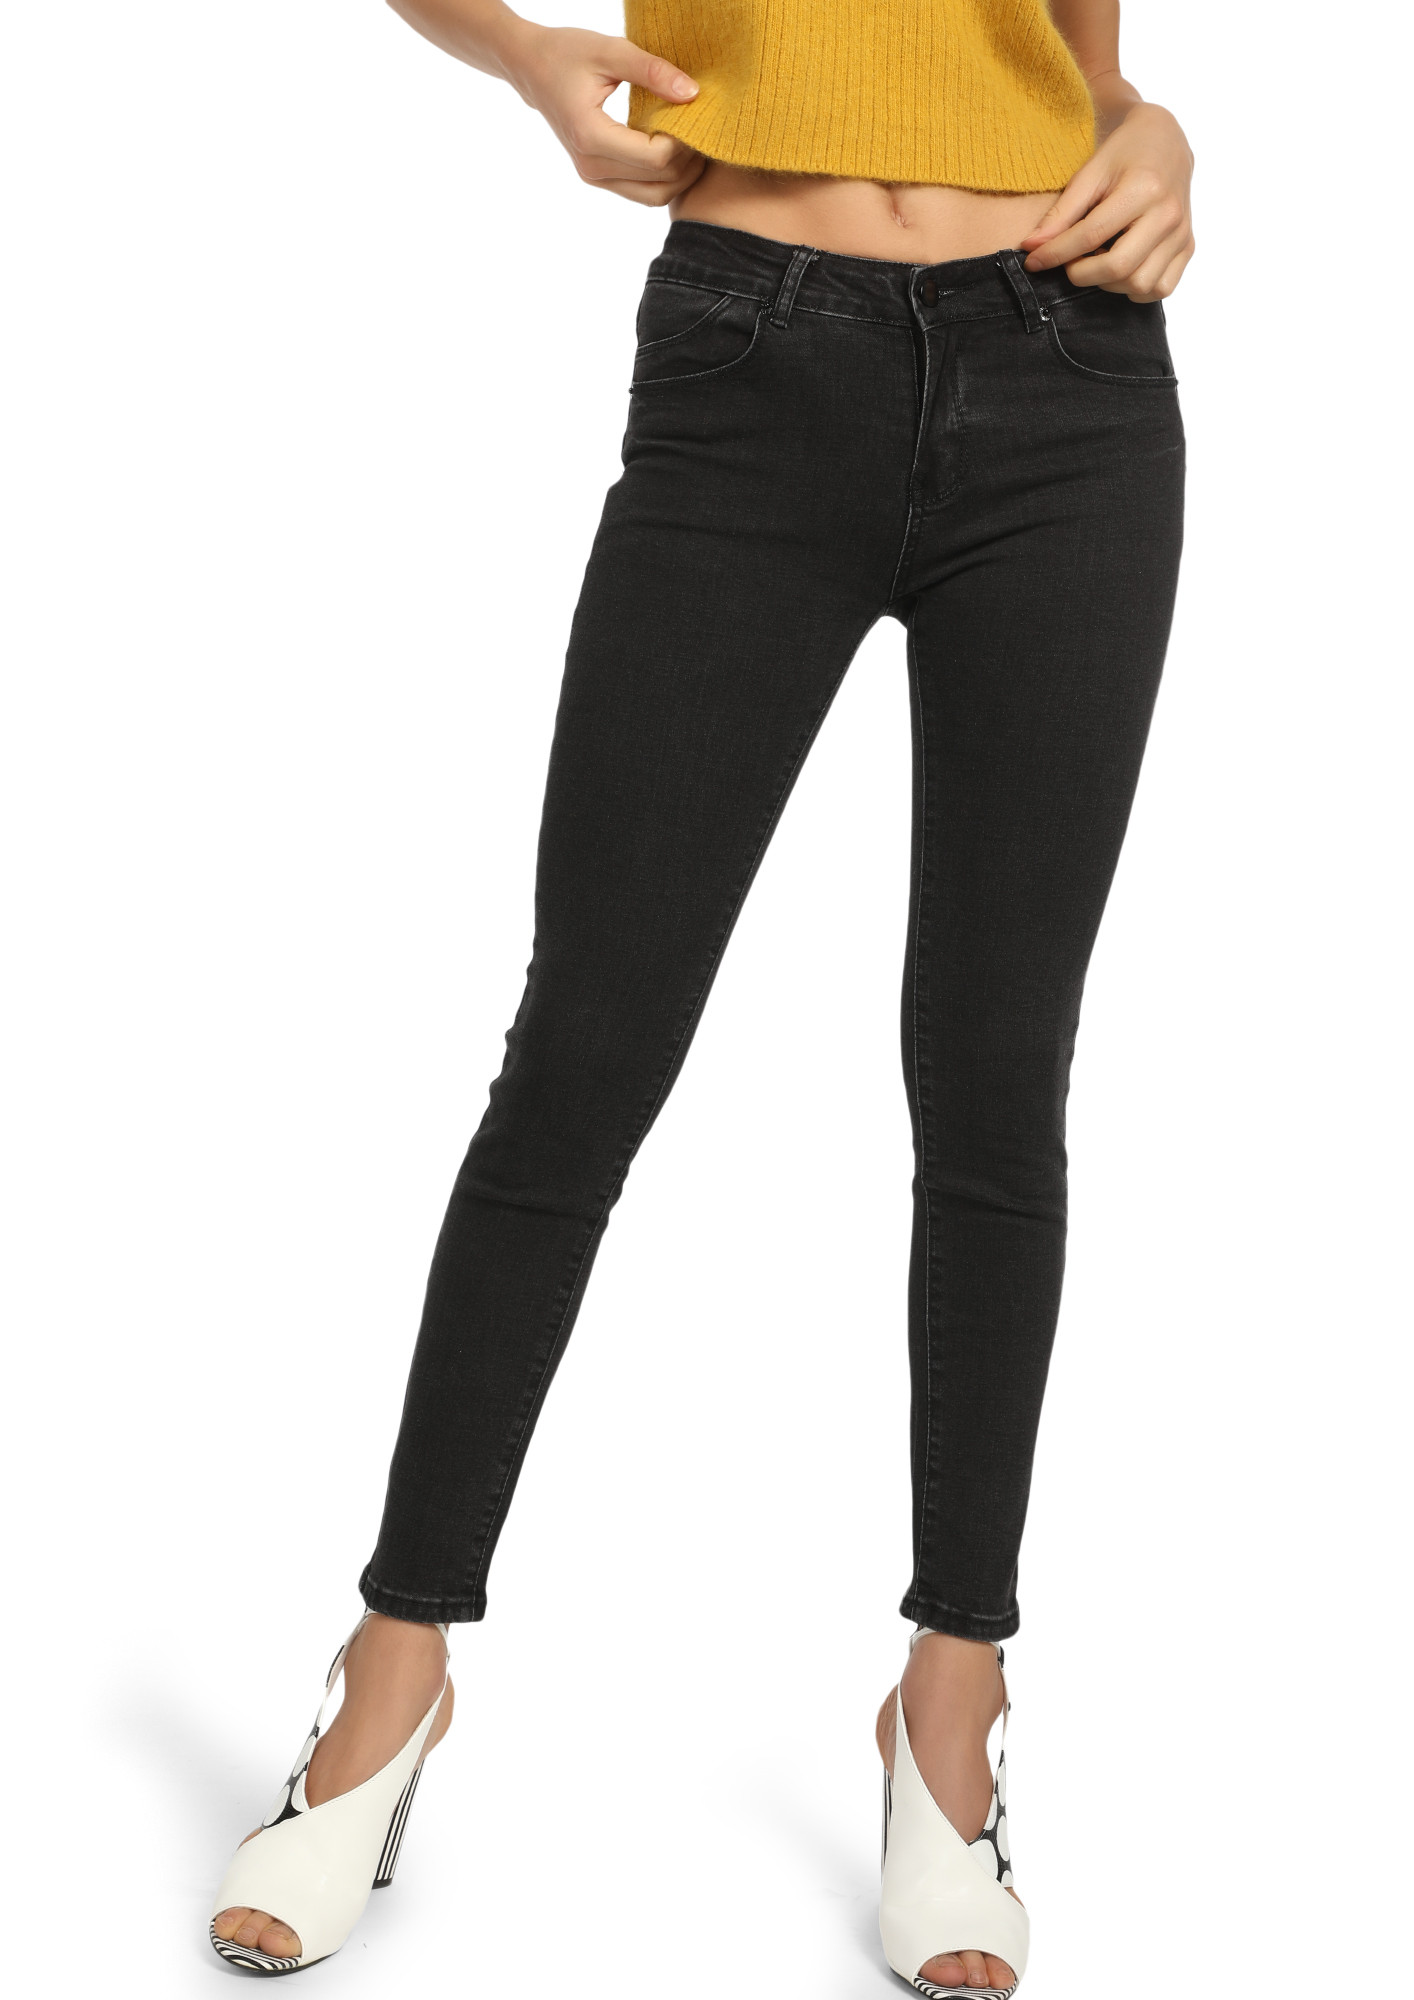 LOOKING FOR YOU BLACK SLIM-FIT JEANS